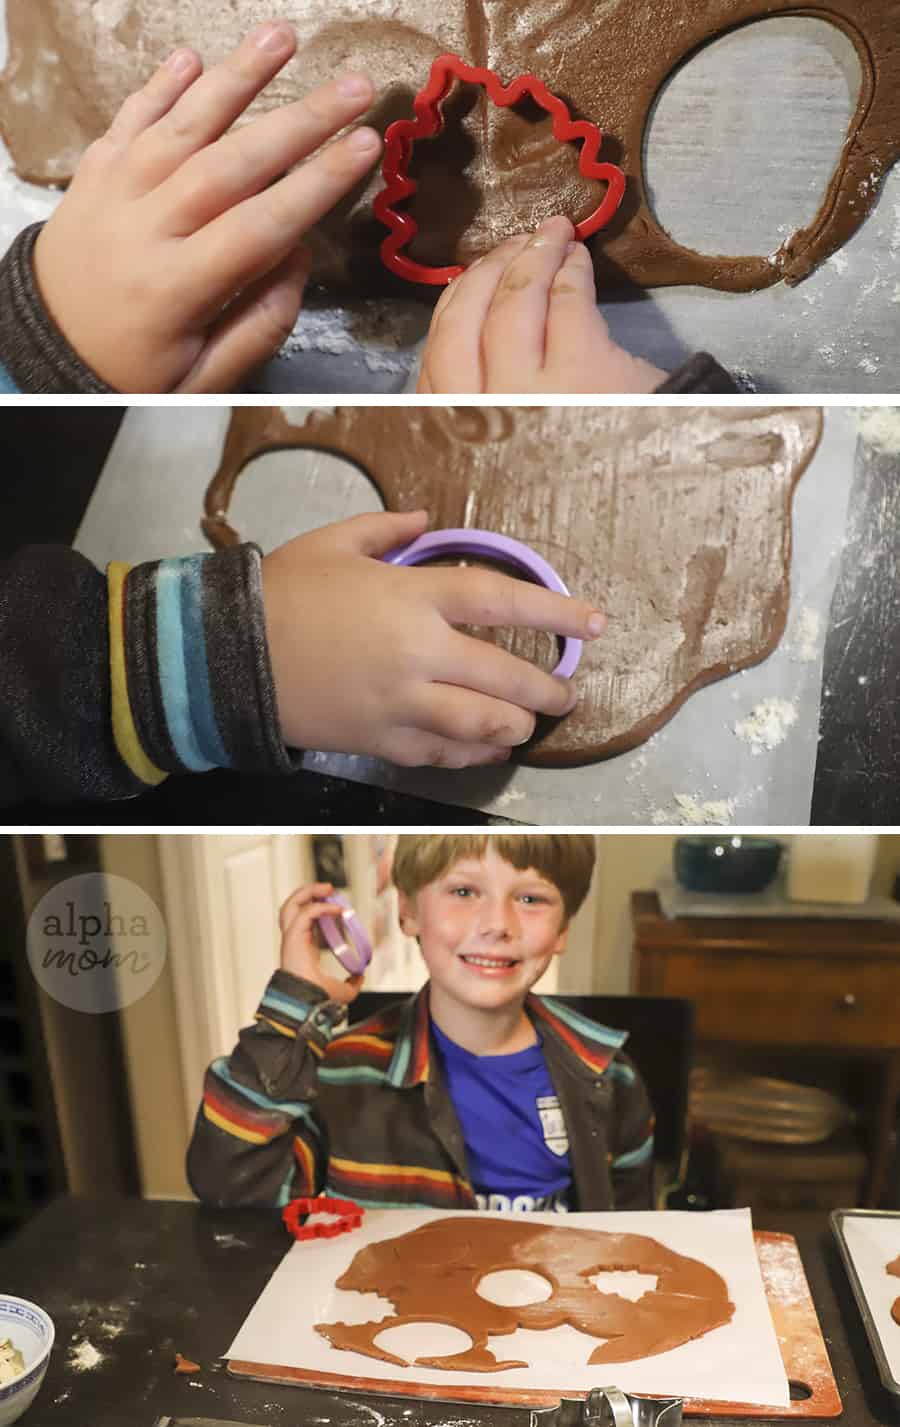 three photos on top of each other showing boy using cookie cutter to cut out shape from chocolatey sugar cookie dough